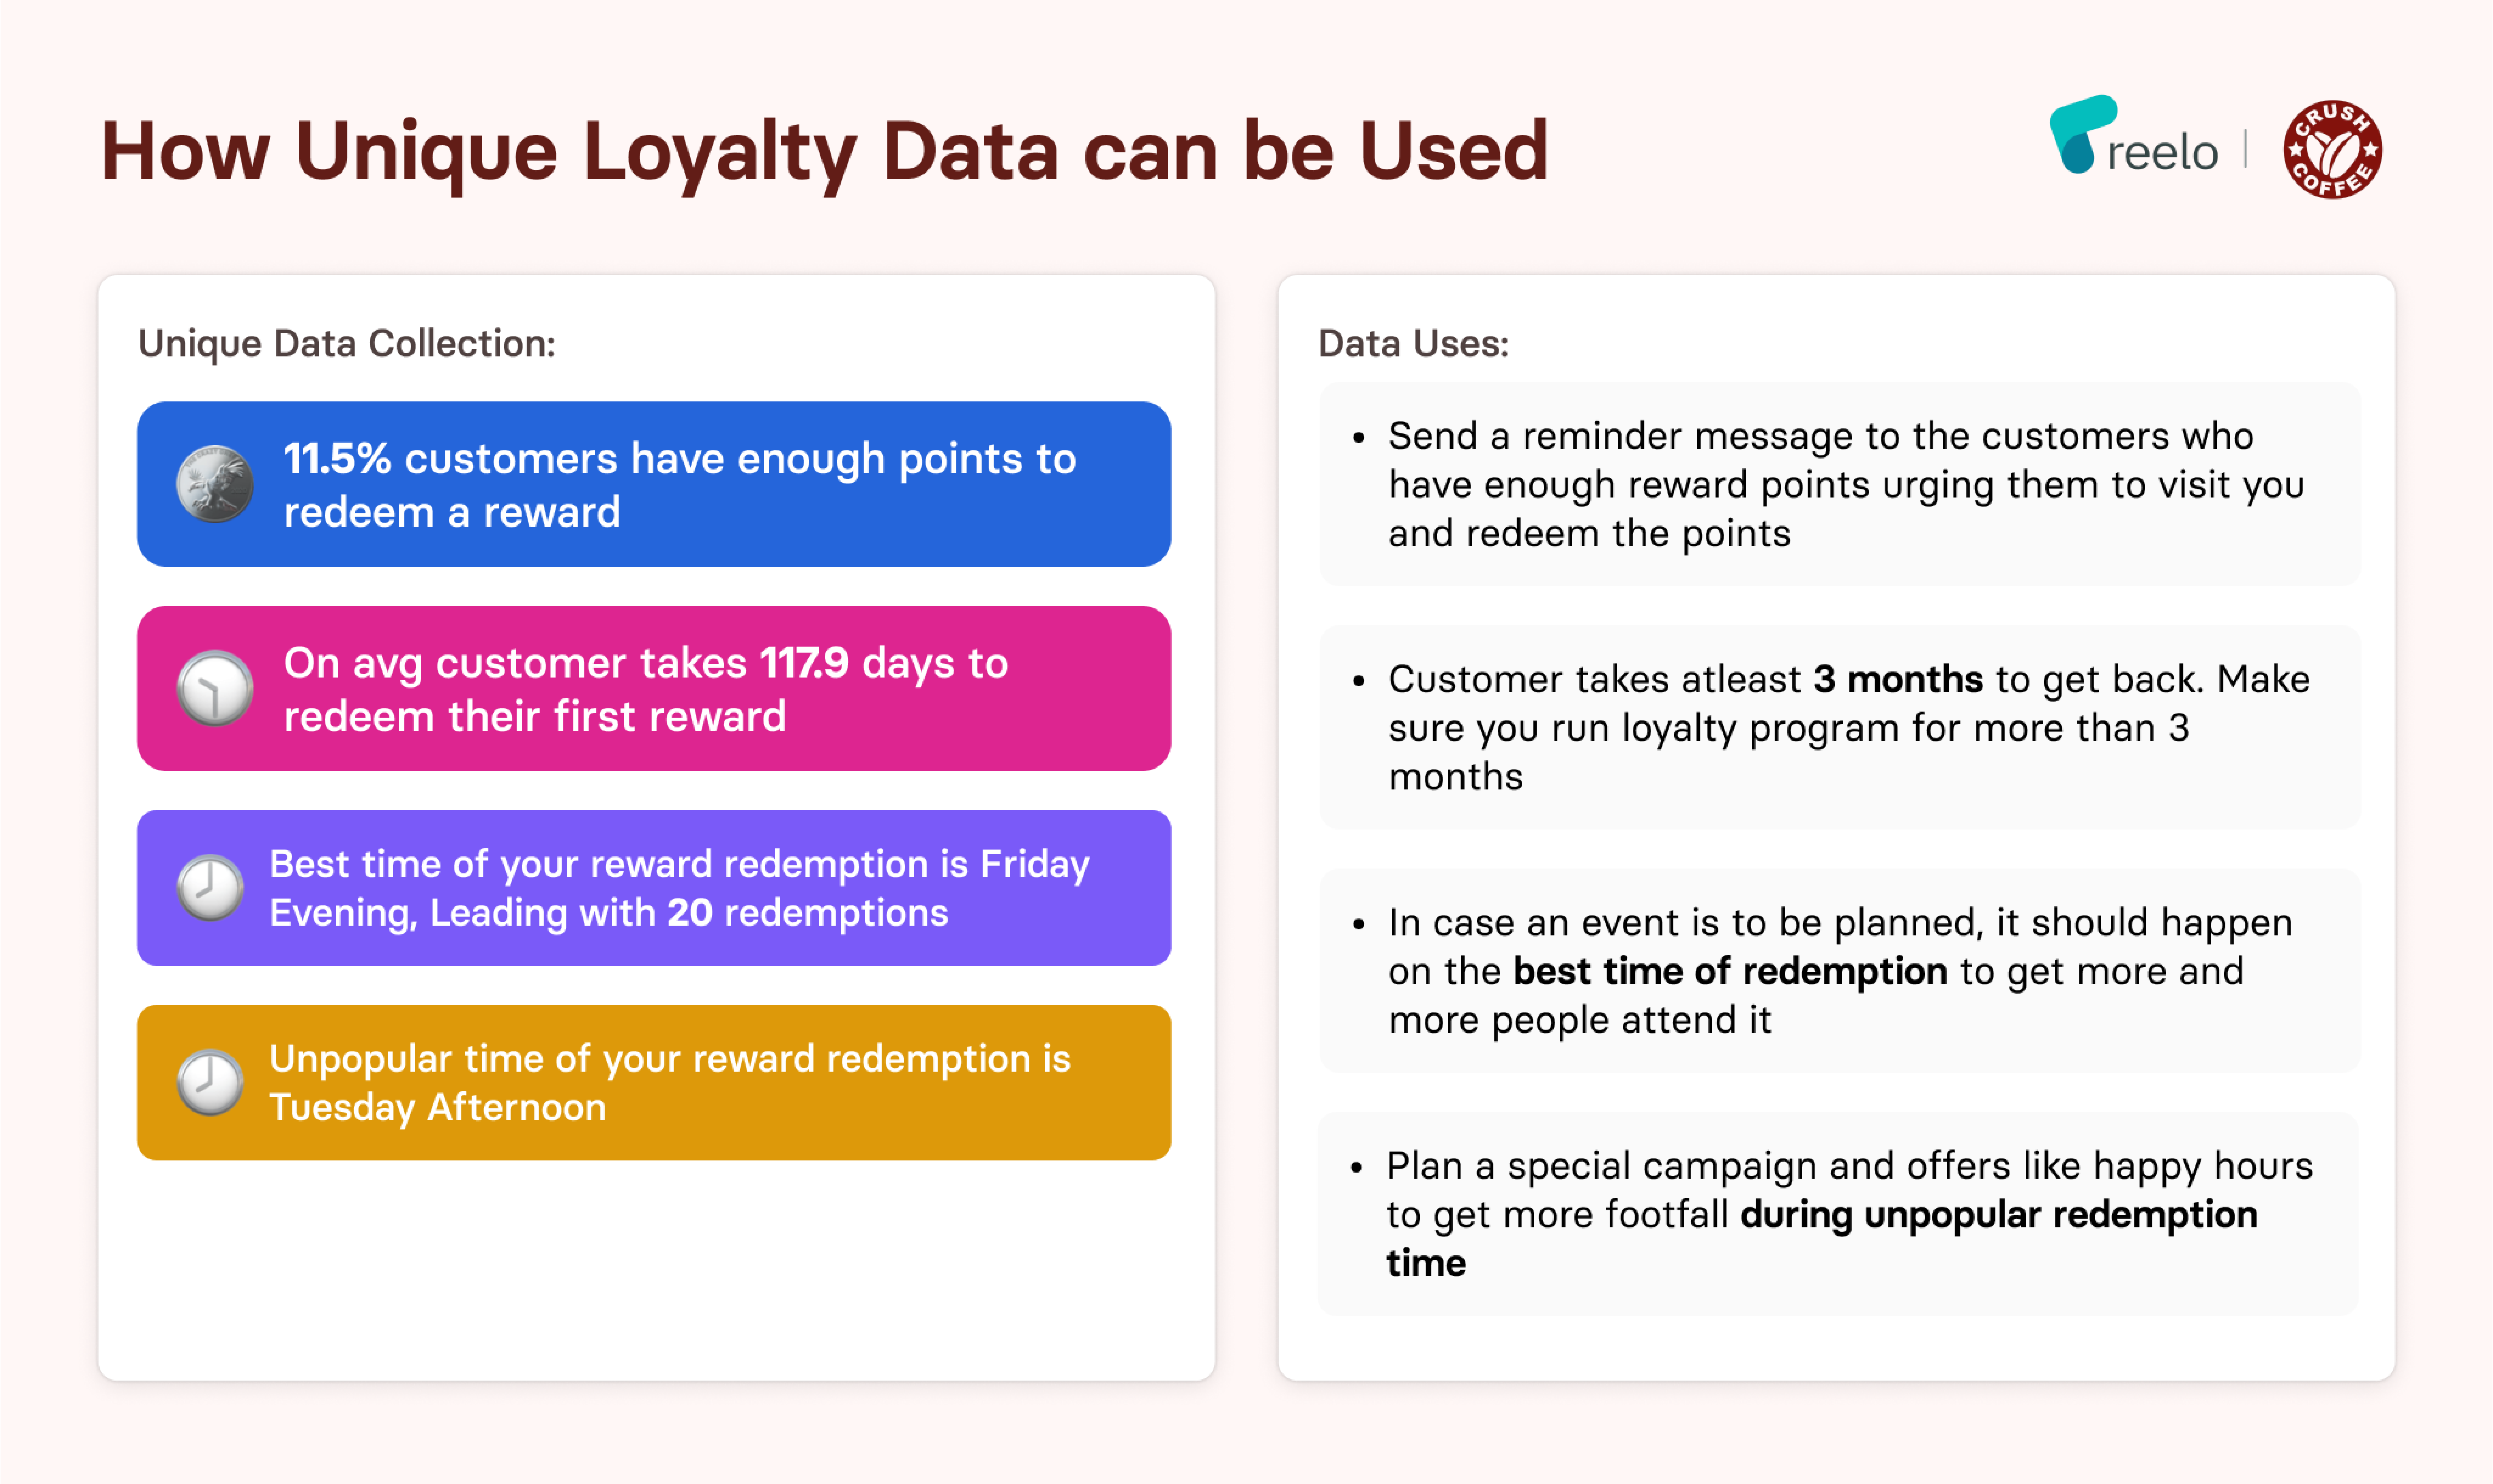 How should Loyalty data be used?